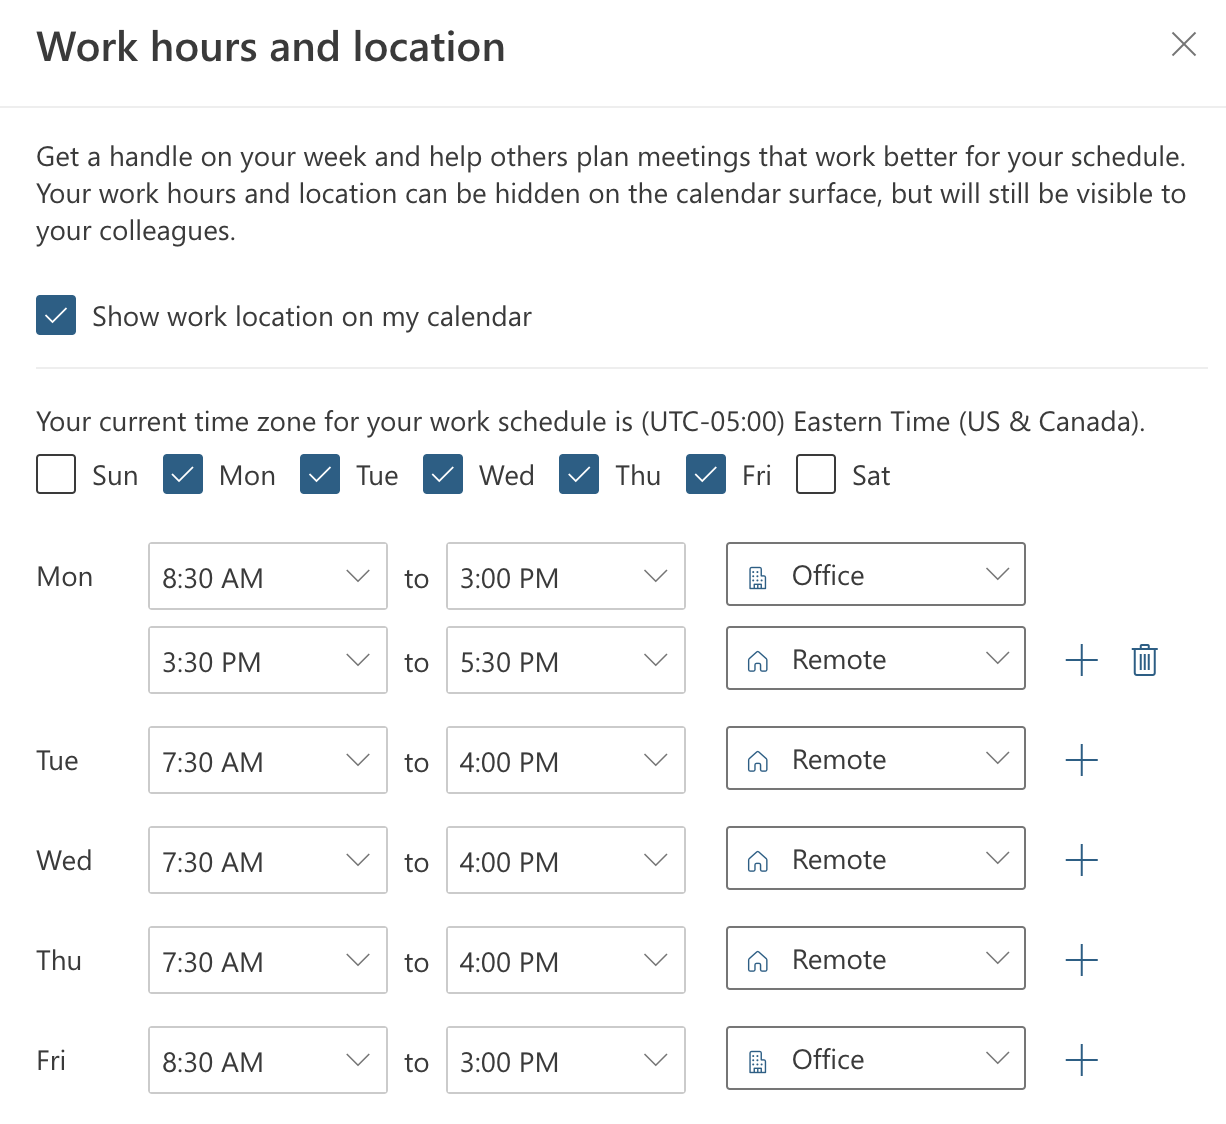 Screen shot of work hours and location, which allow for multiple start and end times in one day and in office and remote flags for each time block